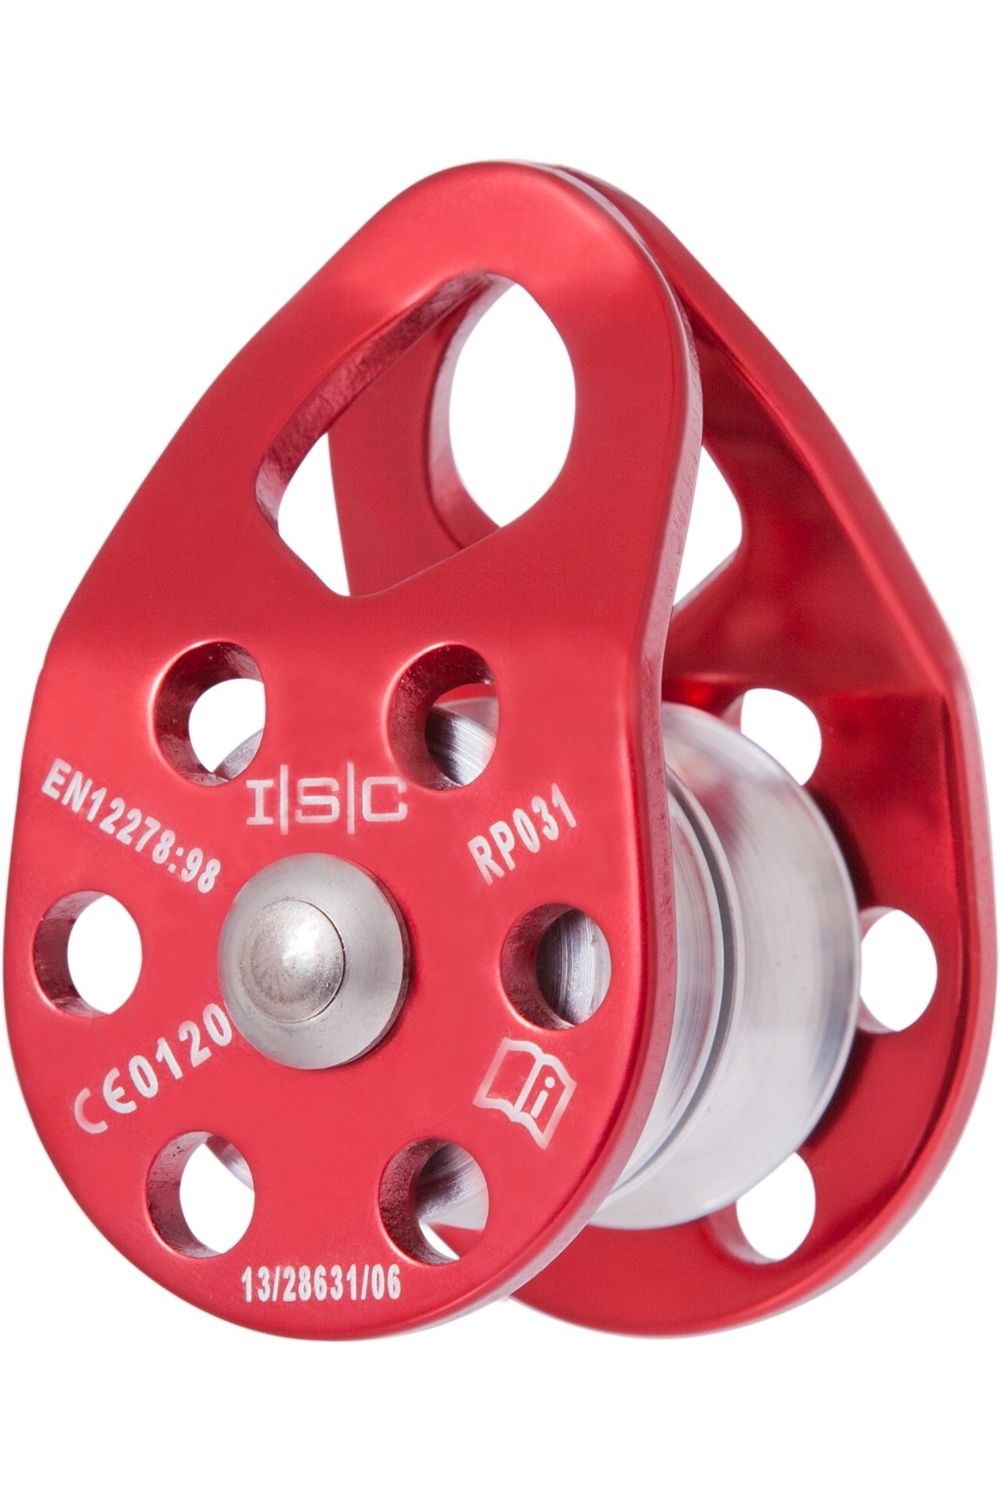 ISC Double Re-direct Pulley - Anton's Timber